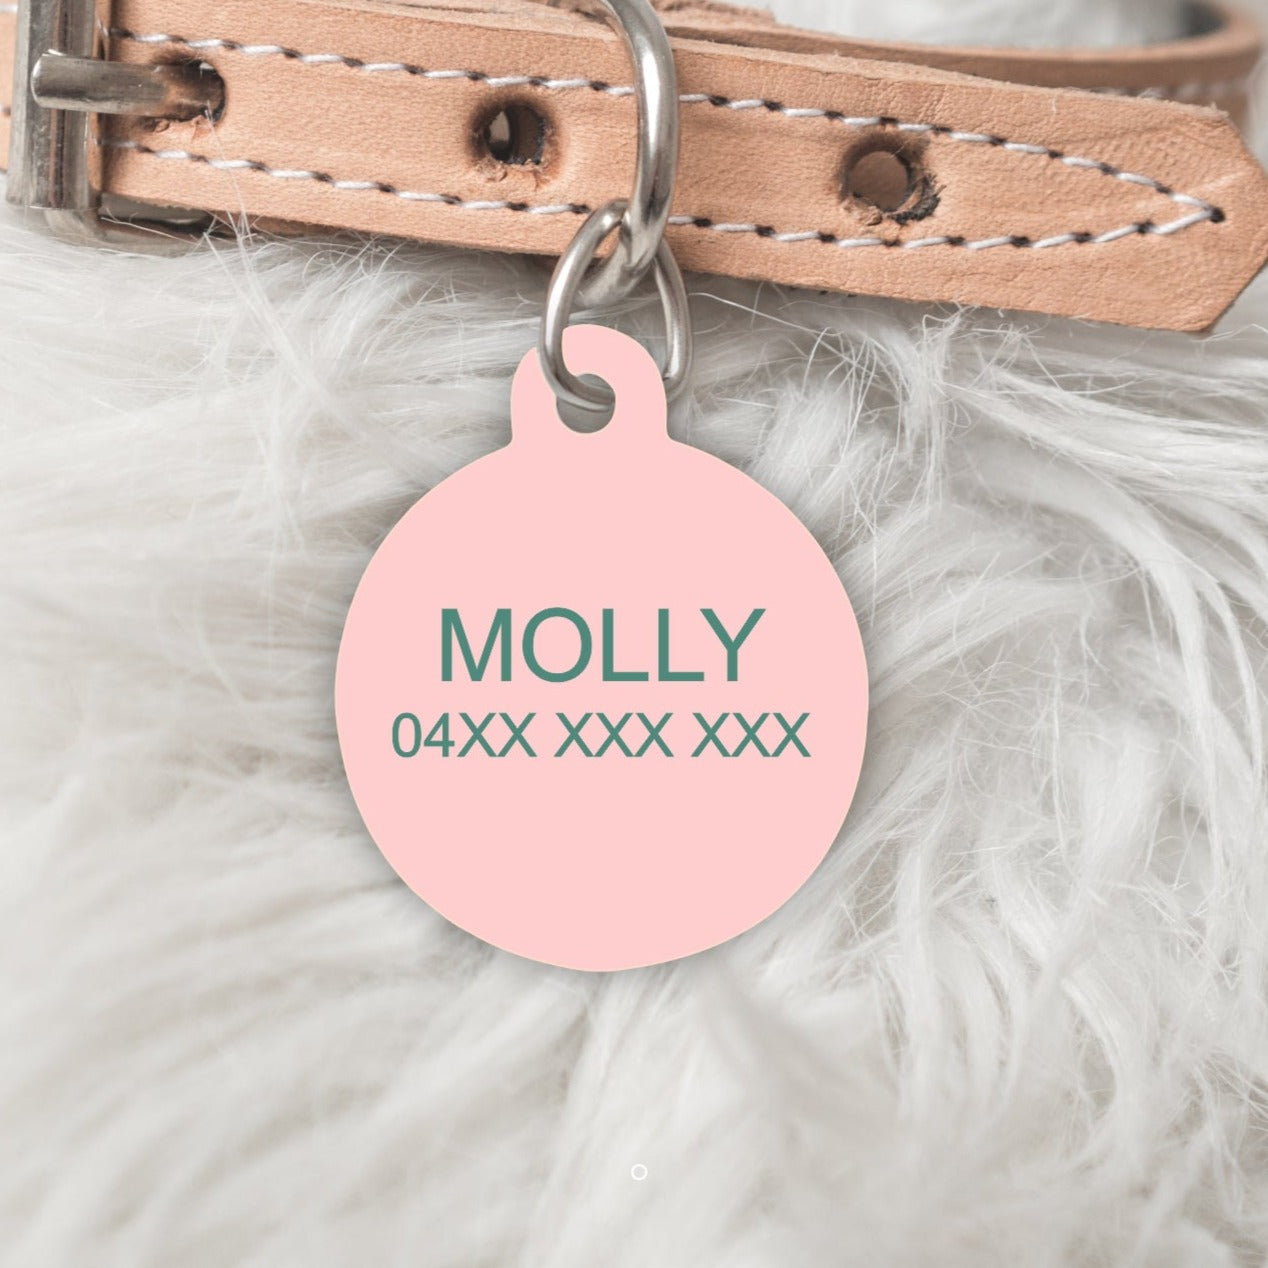 Monogram A-Z Personalised Pet dog or cat ID Tag